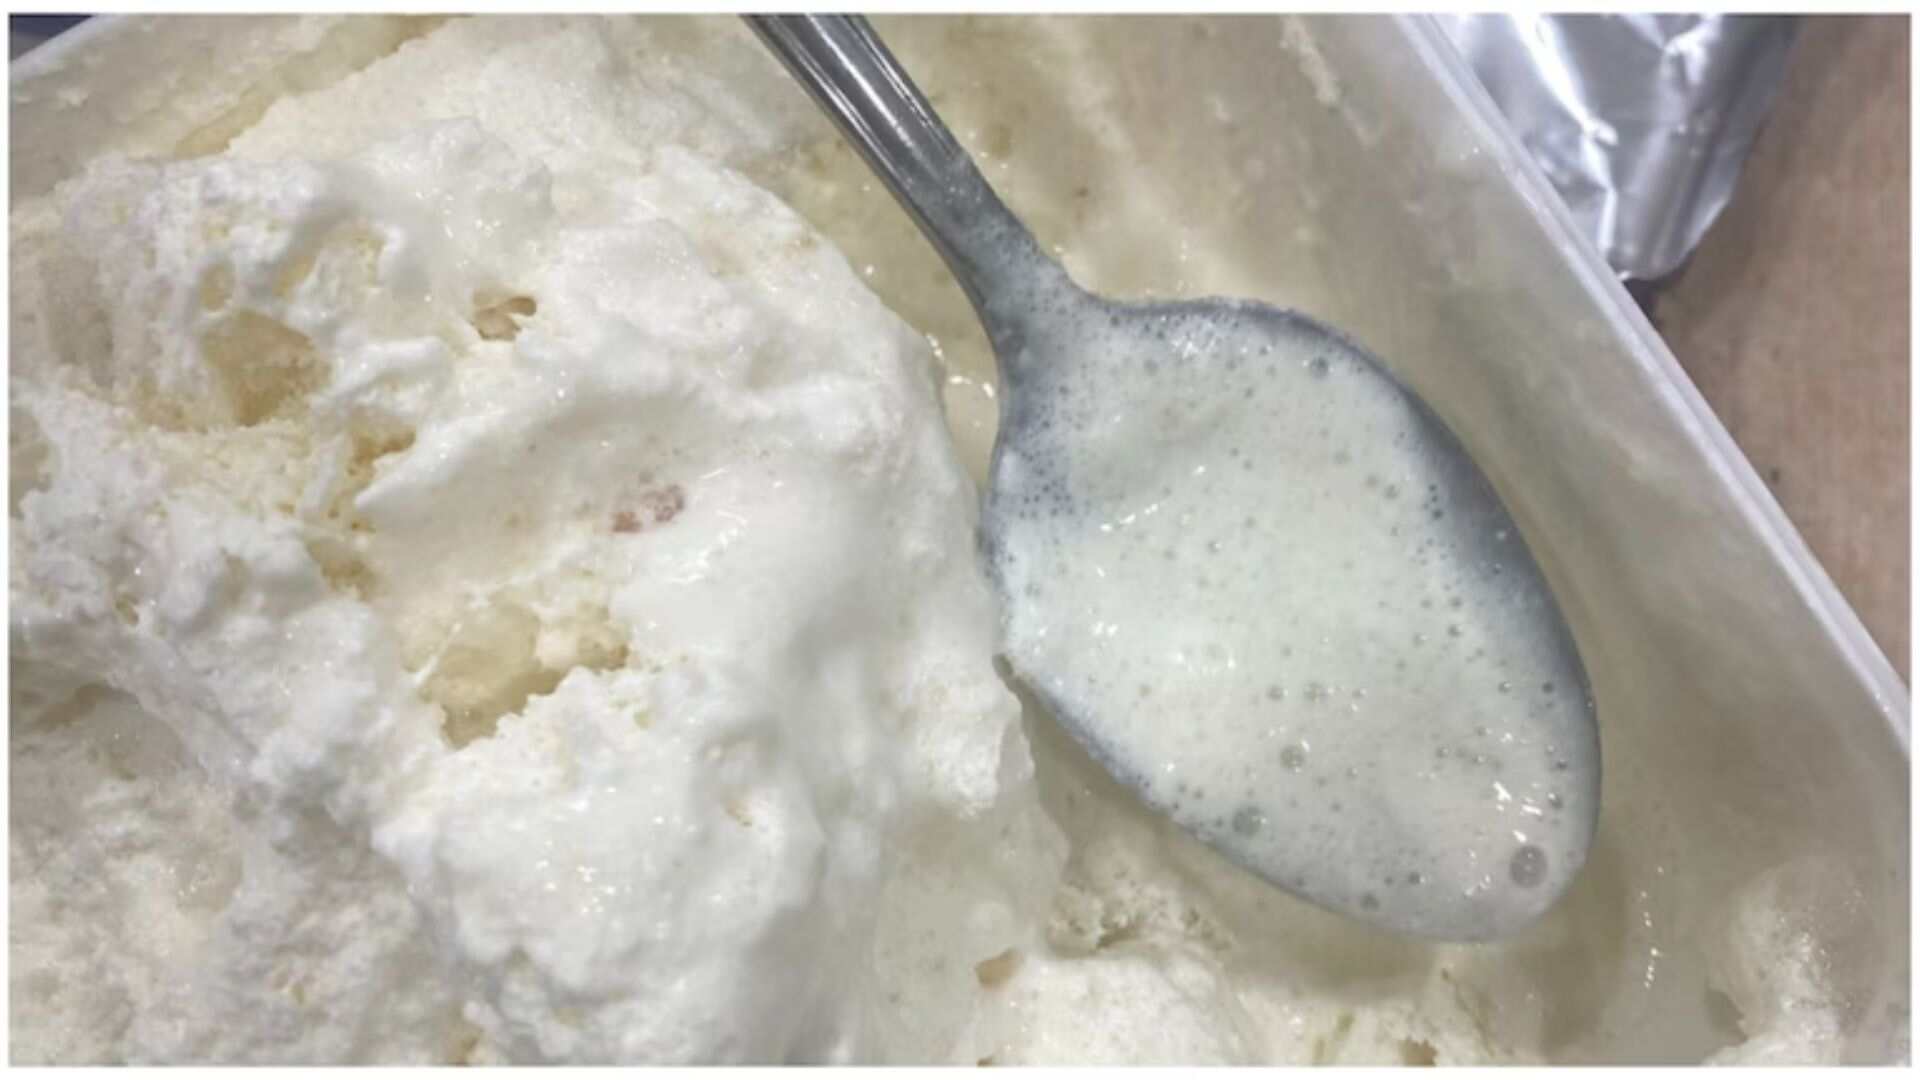 Bengaluru Woman Orders Amul Ice Cream On Zepto, Receives ‘Oily Frothy Liquid’ Instead